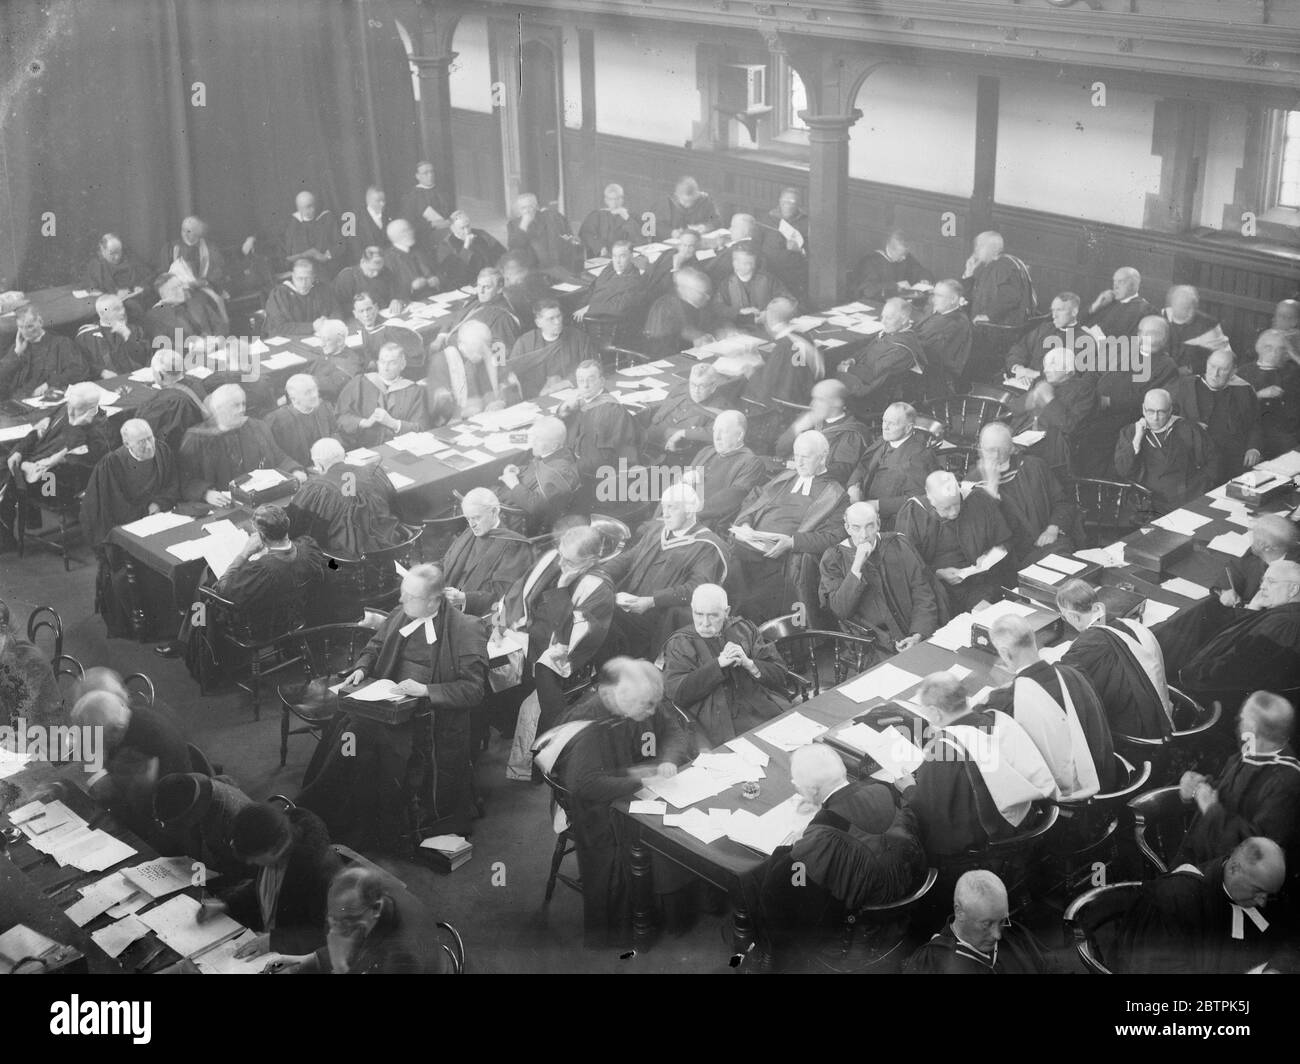 Convocation of Canterbury opens . The sitting of the Lower House of the Convocation in progress at Church House , Westminster . Dr Kidd is the Prolocutor . 23 January 1935 Stock Photo